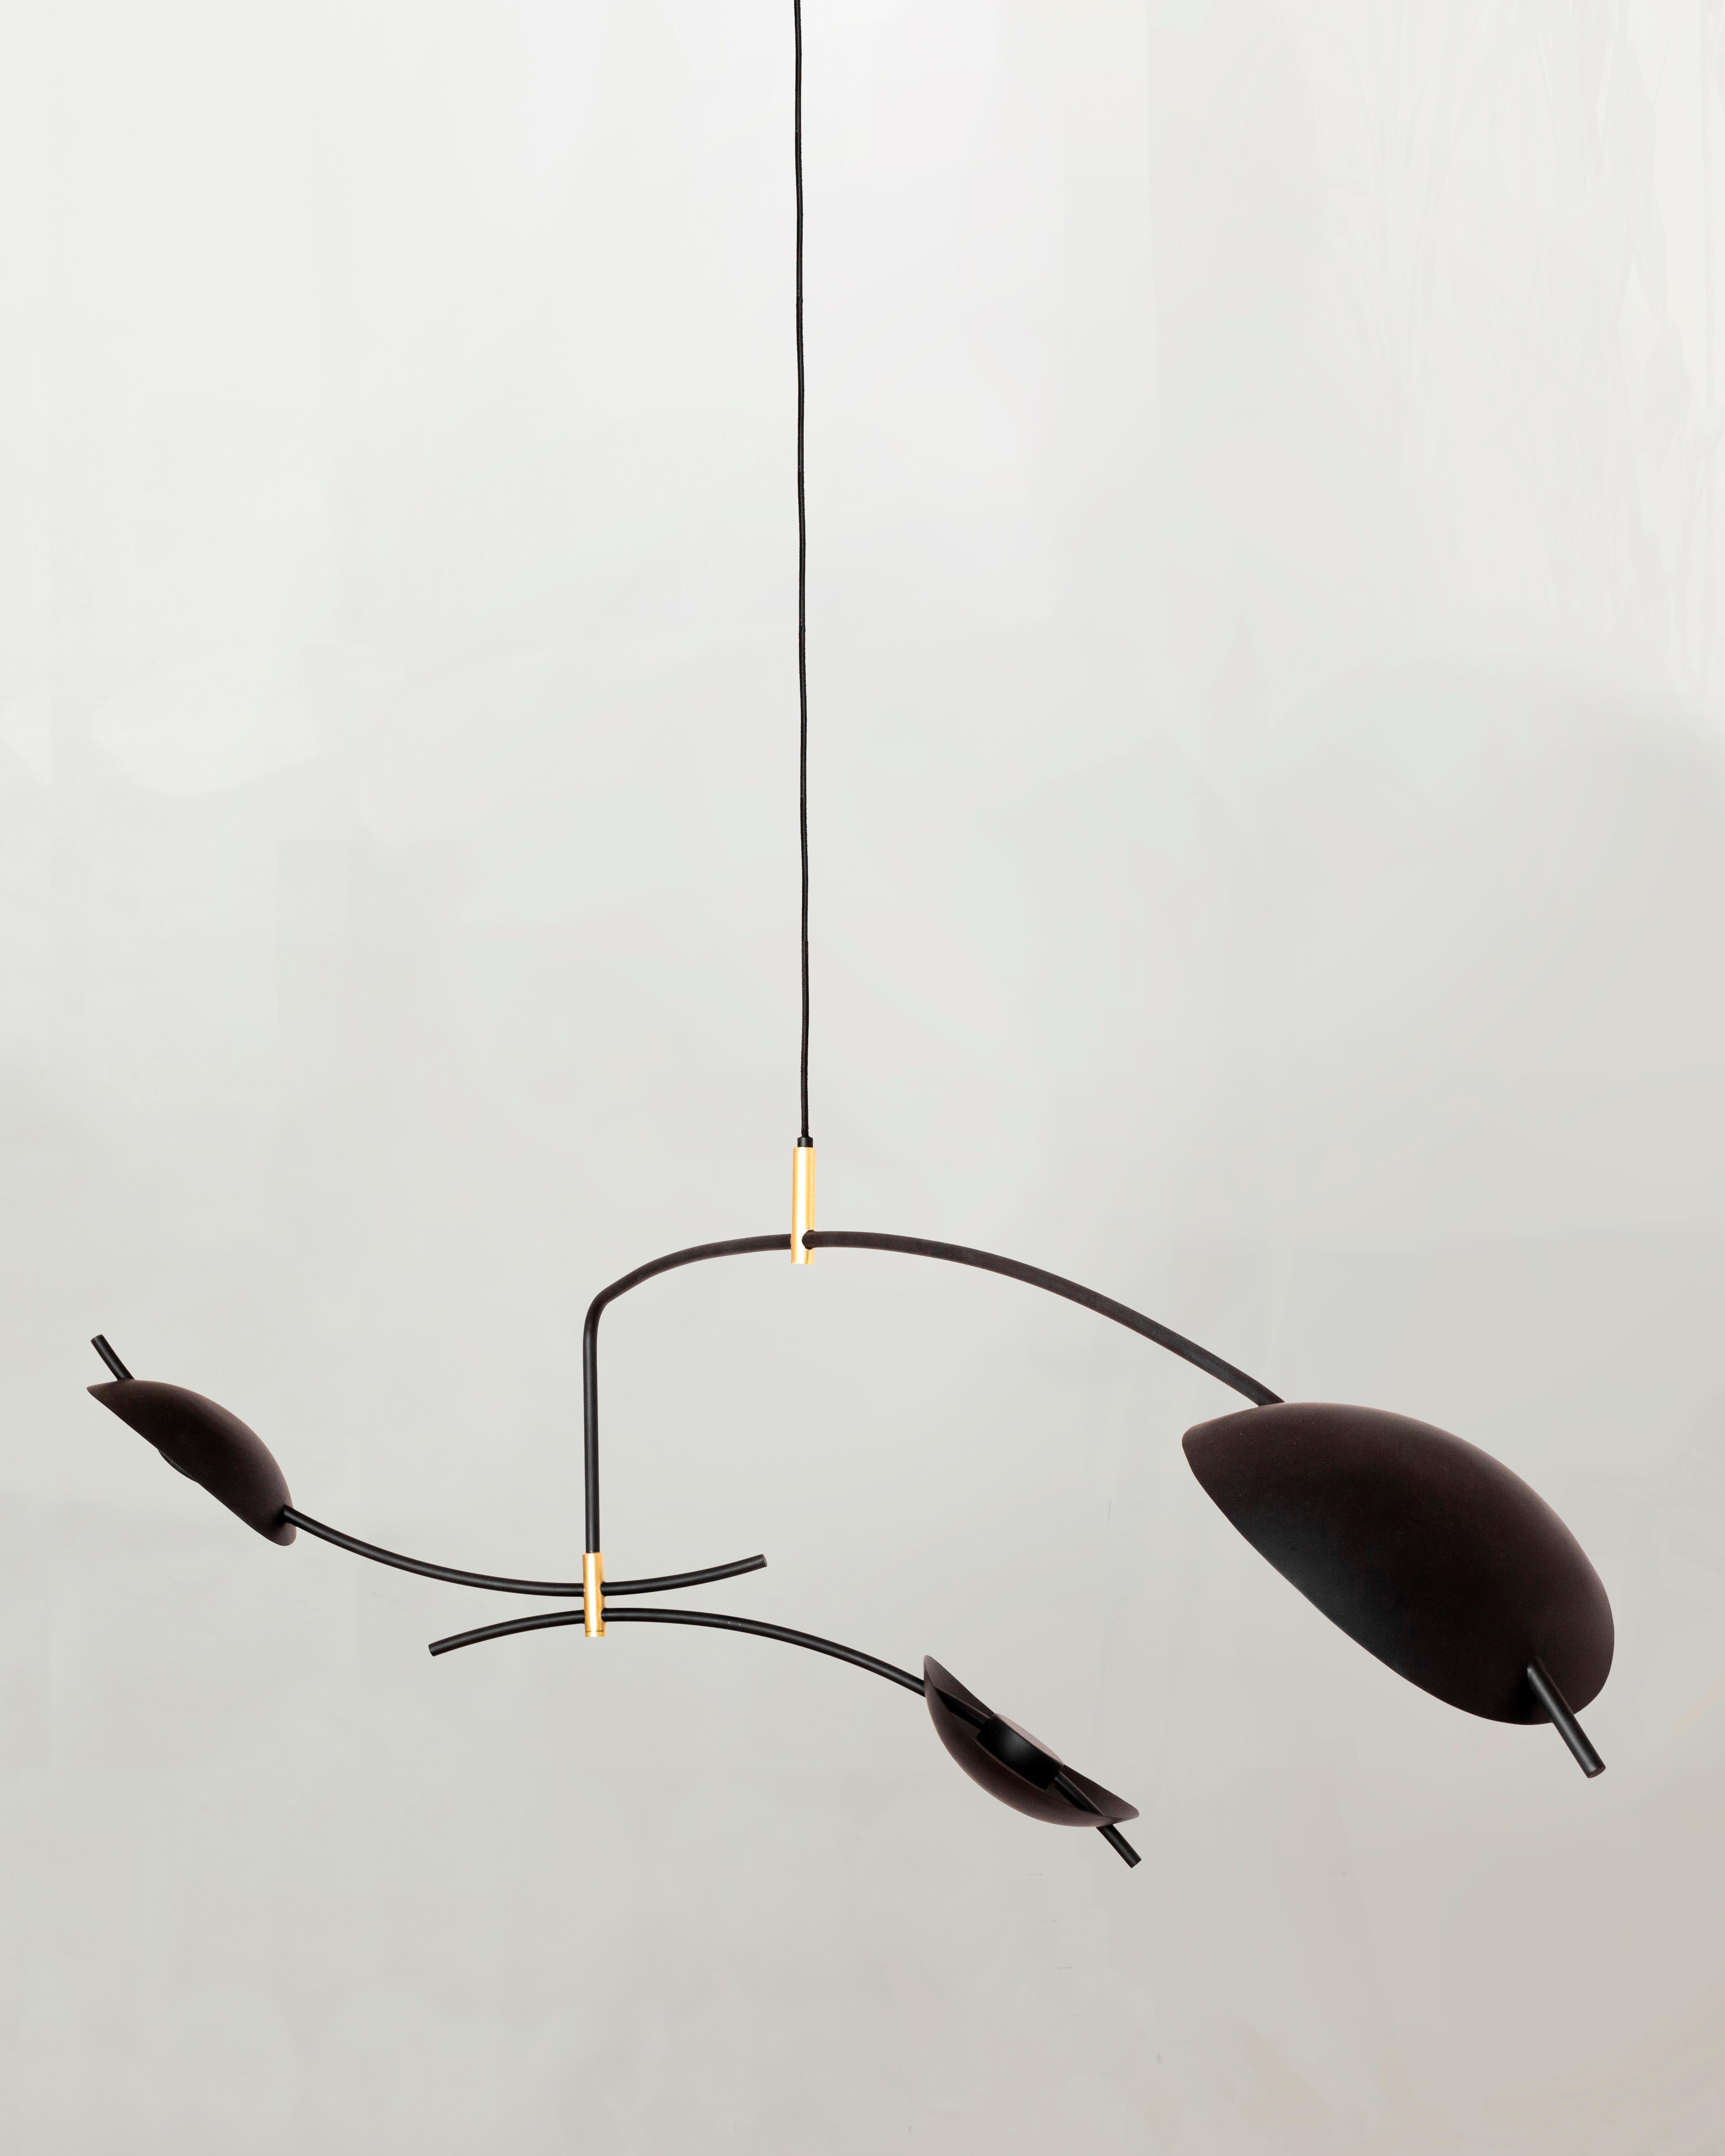 Espiga mobile lamp pendant by Rebeca Cors
Limited Edition: 2022-2027
Dimensions: D 50 x W 160 x H 50 cm
Material: Steel, Brass.
All our lamps can be wired according to each country. If sold to the USA it will be wired for the USA for